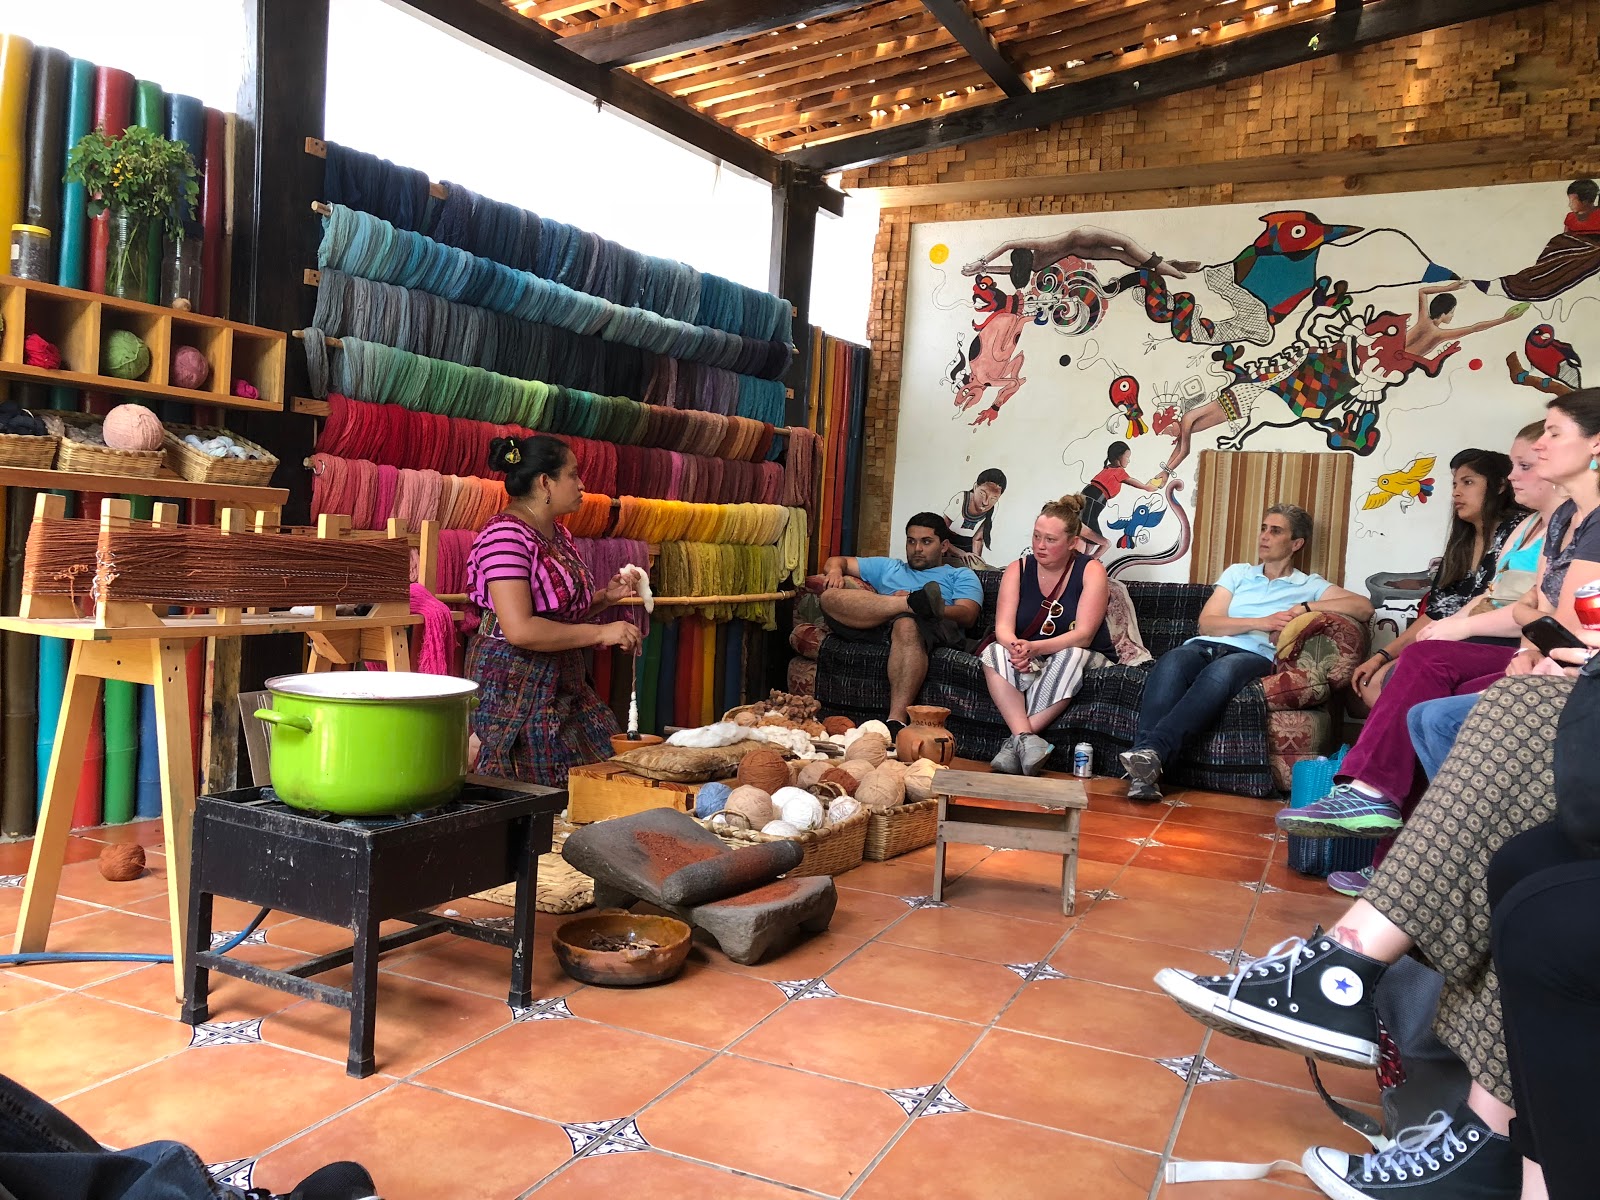 Study abroad participants listening to weaving demonstration